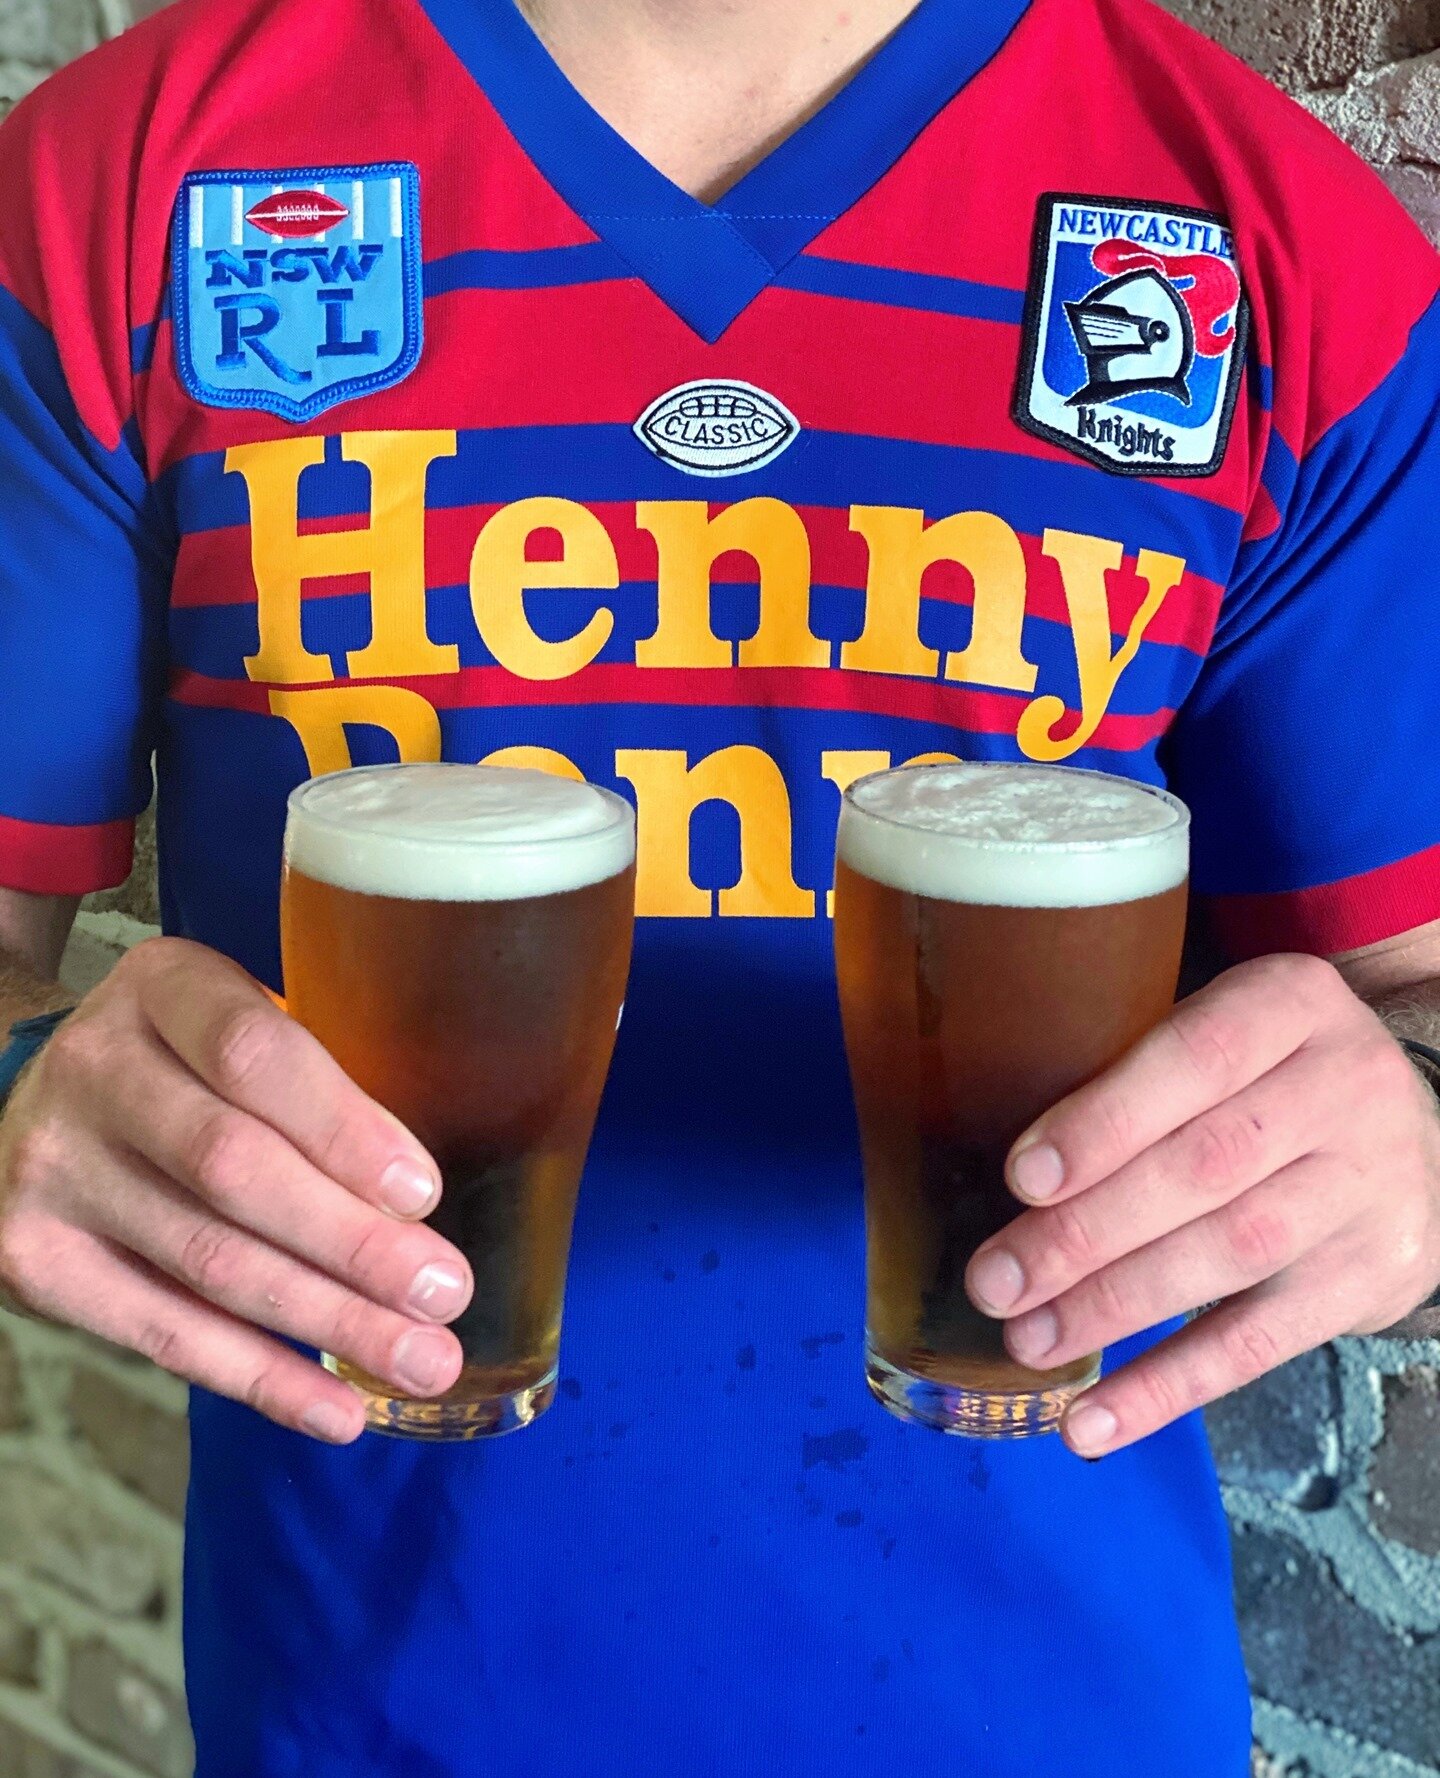 We all have Knights fever here at The Shorty! 💙❤️💙❤️⁠
Don't forget $5 beer &amp; wine while the game is on Sunday &amp; $6 Cruisers ALL day! ⁠
⁠
⁠
⁠
#shortyhotel #newcastle #newcastlensw #newcastlepub #pubfood #restaurant #bar #foodie #pubgrubhub #